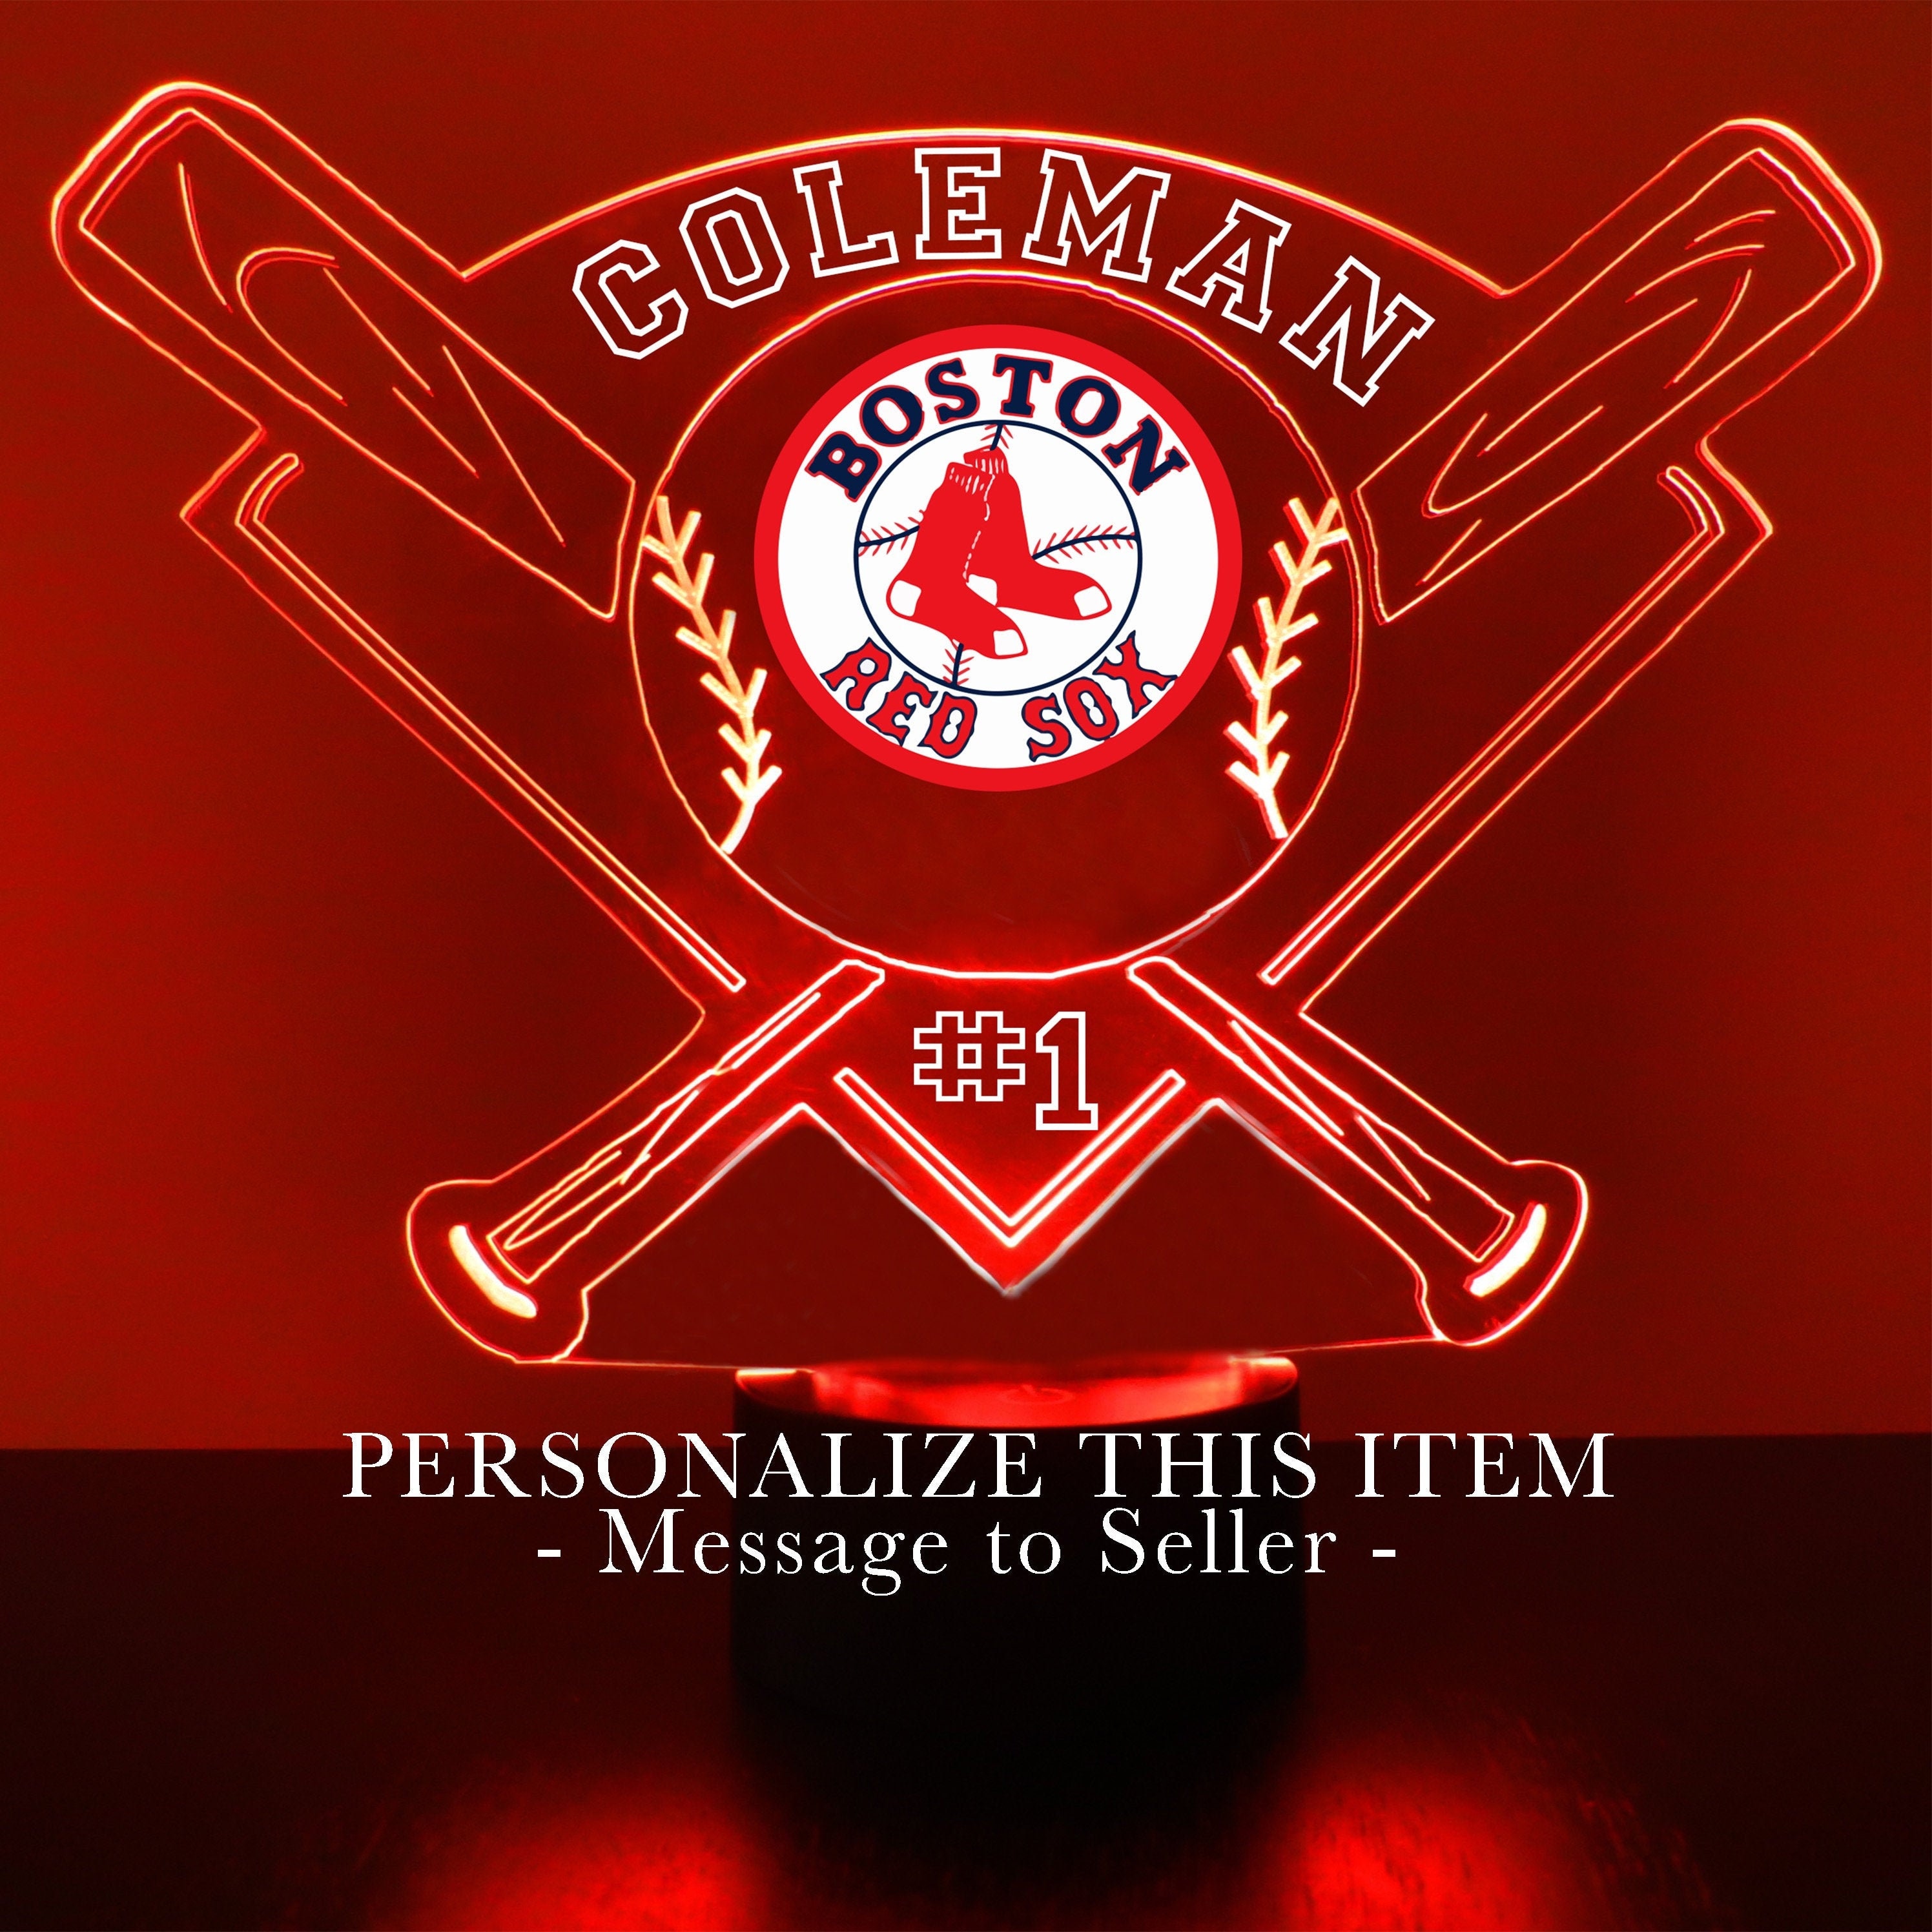 Boston Red Sox Baseball Team 3D Night Light with Remote Control Color Changing 